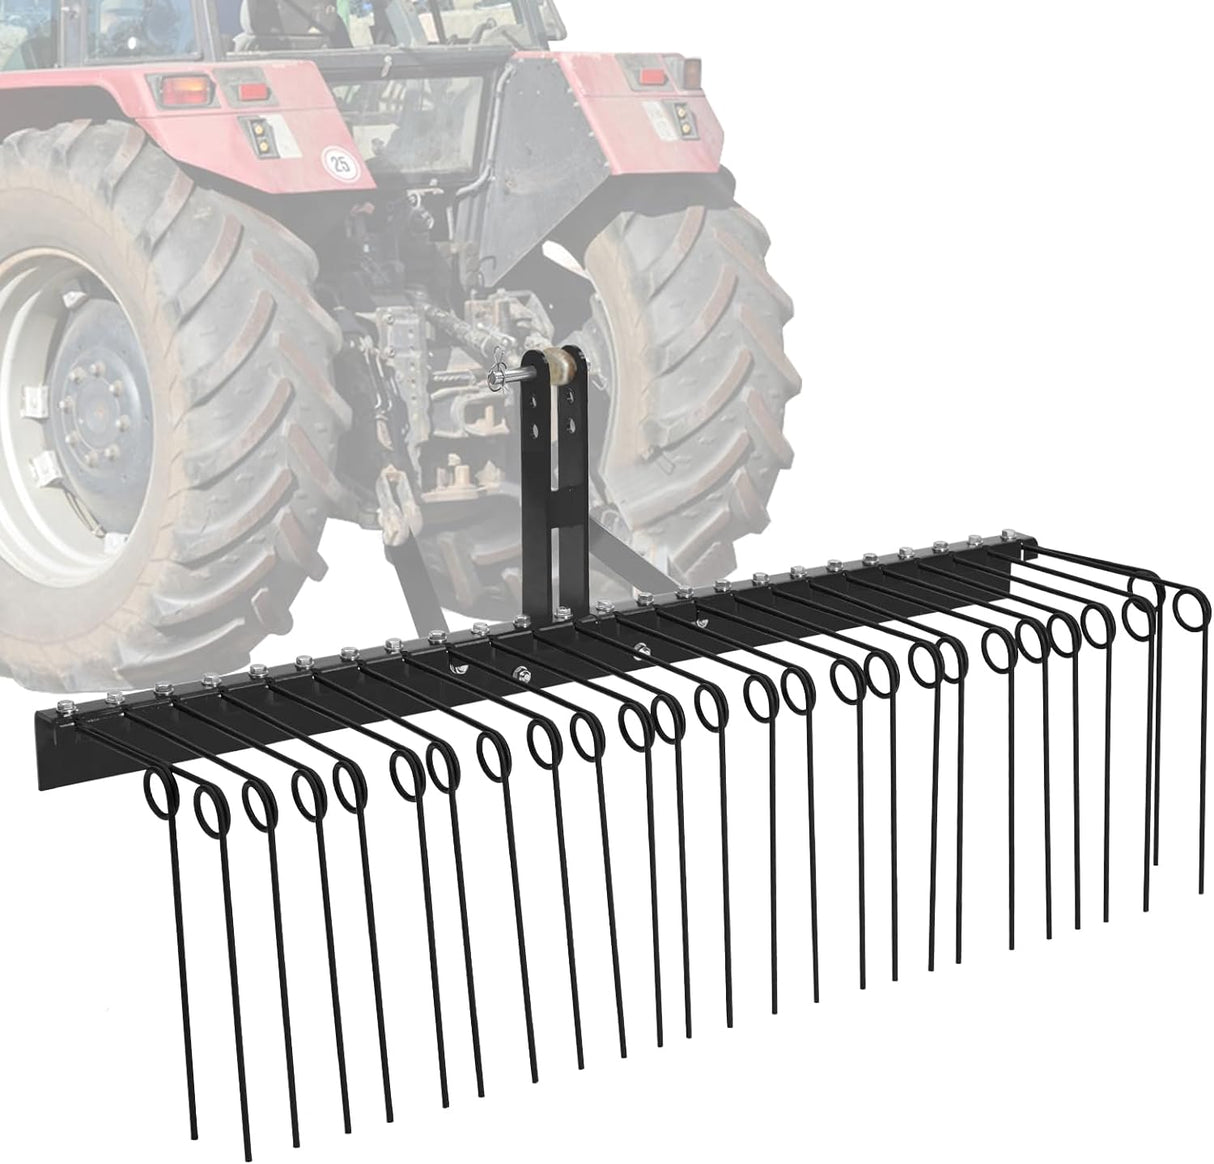 60 Inch Pine Straw Rake, 26 Coil Spring Tines Durable Powder Coated Steel Tow Behind Landscape Rake with 3 Point Hitch Receiver Attachment Fit to Cat0 Cat 1 Tractors for Leaves Grass, Black